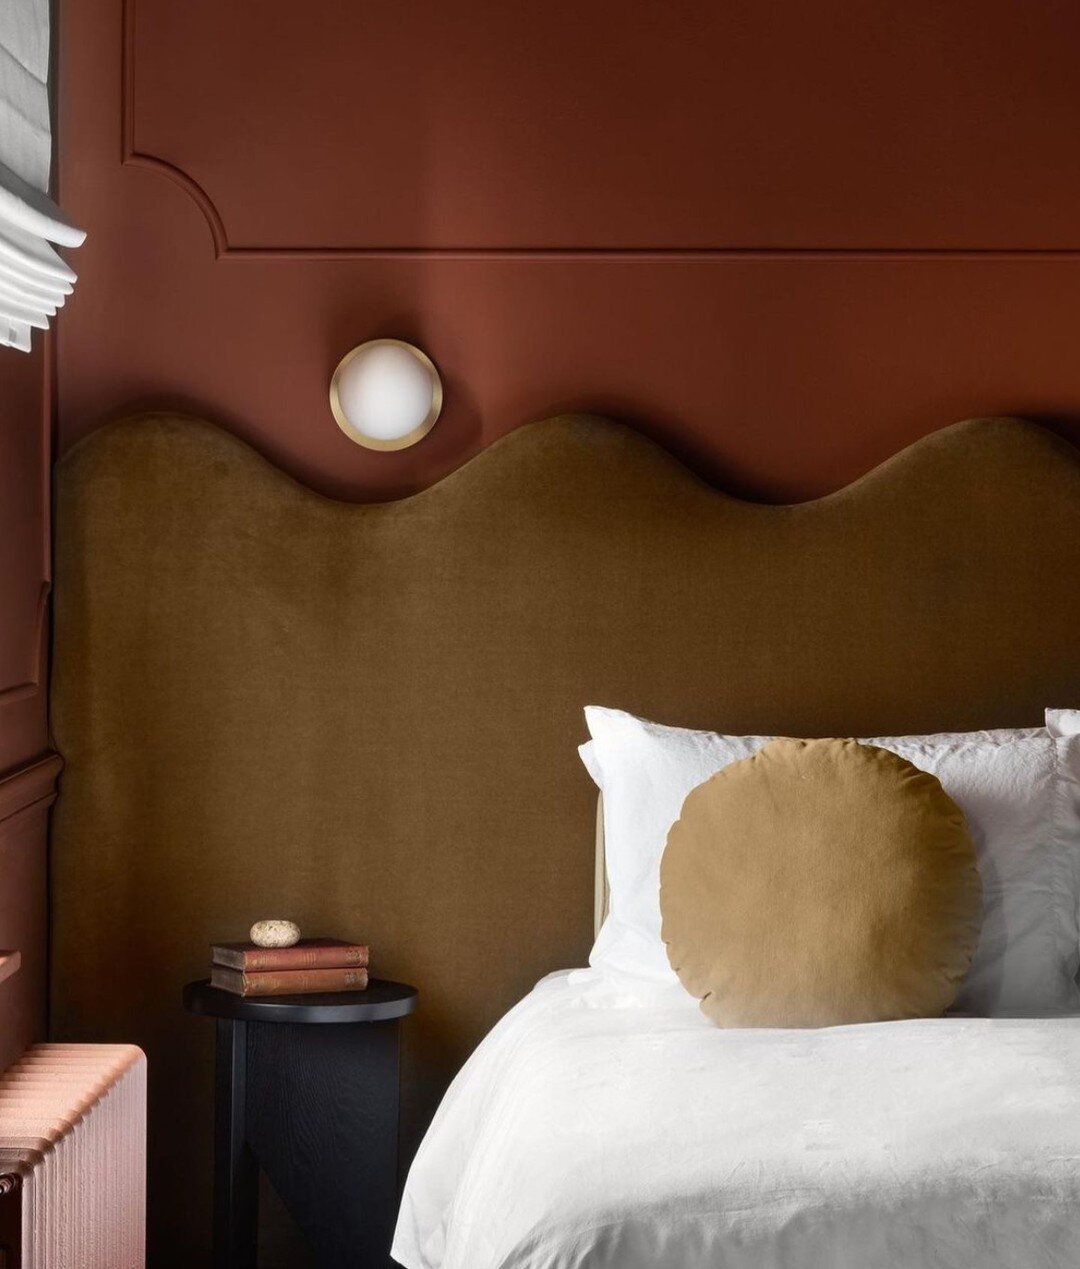 Who says commercial spaces have to feel 'commercial'? We are inspired by this view at @hotel.julie, breaking the mold with a design that's as inviting as your own home. From playful curves to comforting hues, every corner whispers 'stay a little long